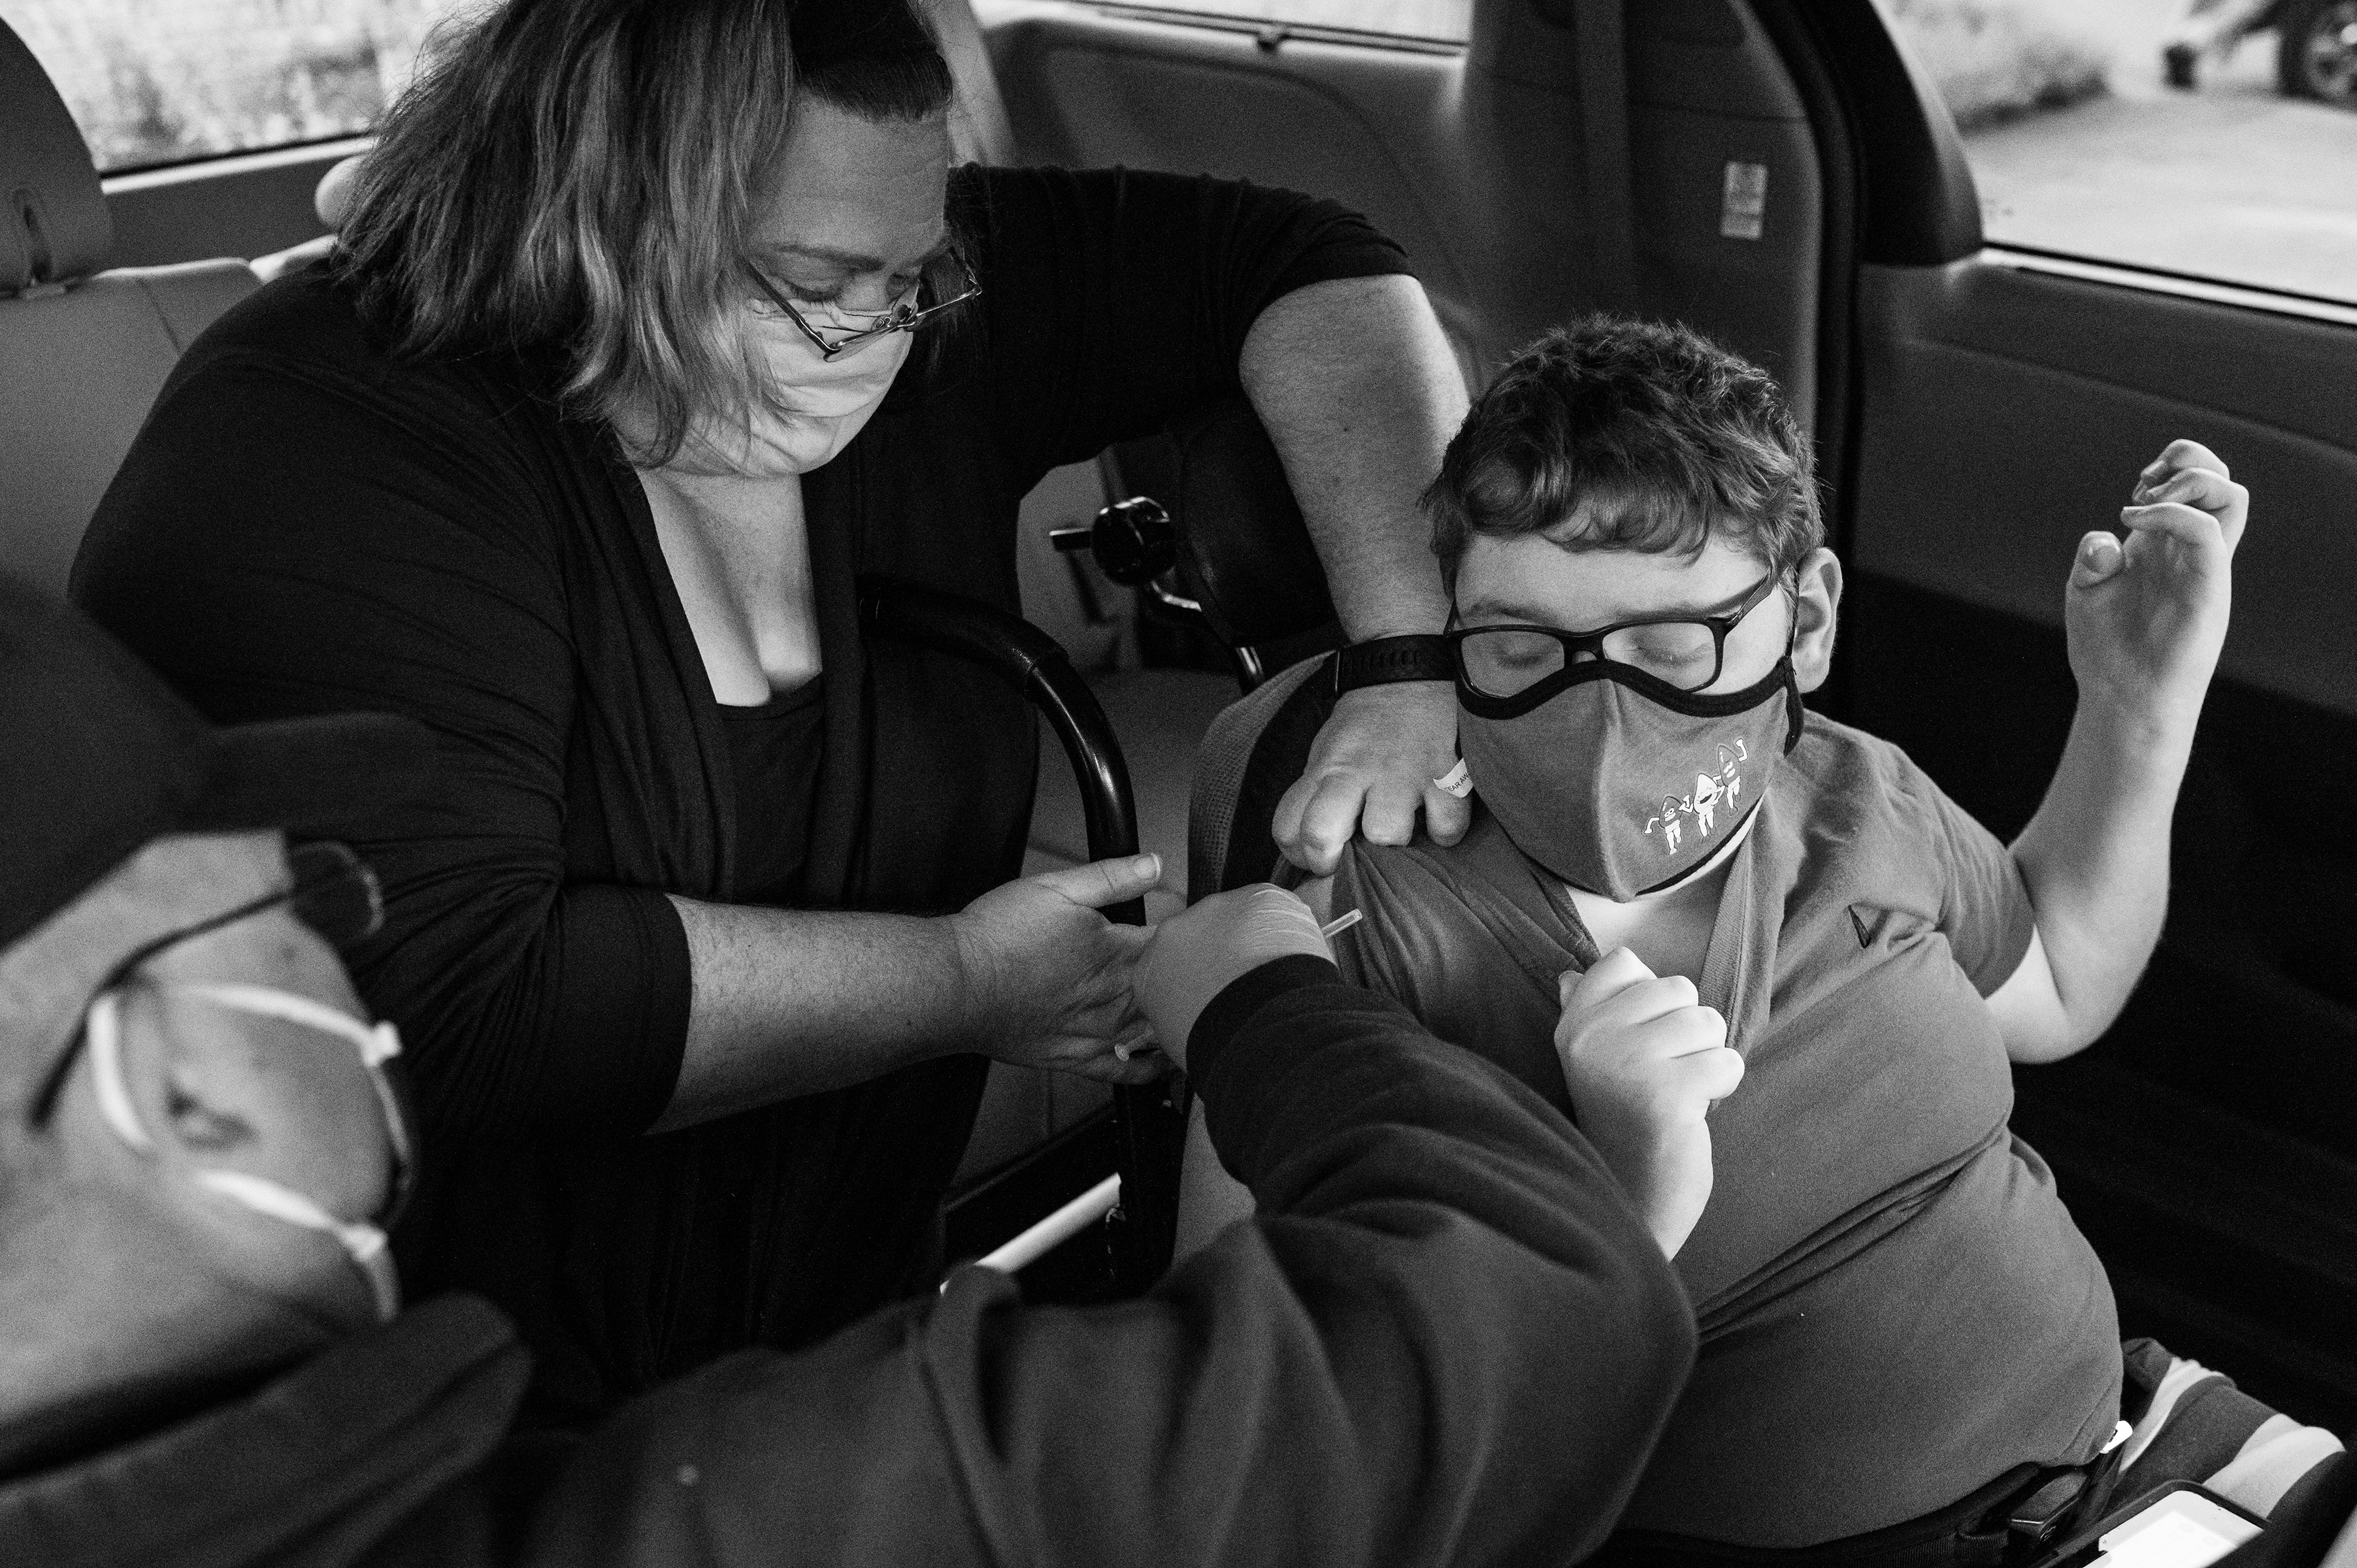 Allison Bungard helps her son Andrew, 13, who has cerebral palsy and Factor V Leiden thrombophilia, receive his shot at a vaccine clinic in Charleston. (Rebecca Kiger for TIME)